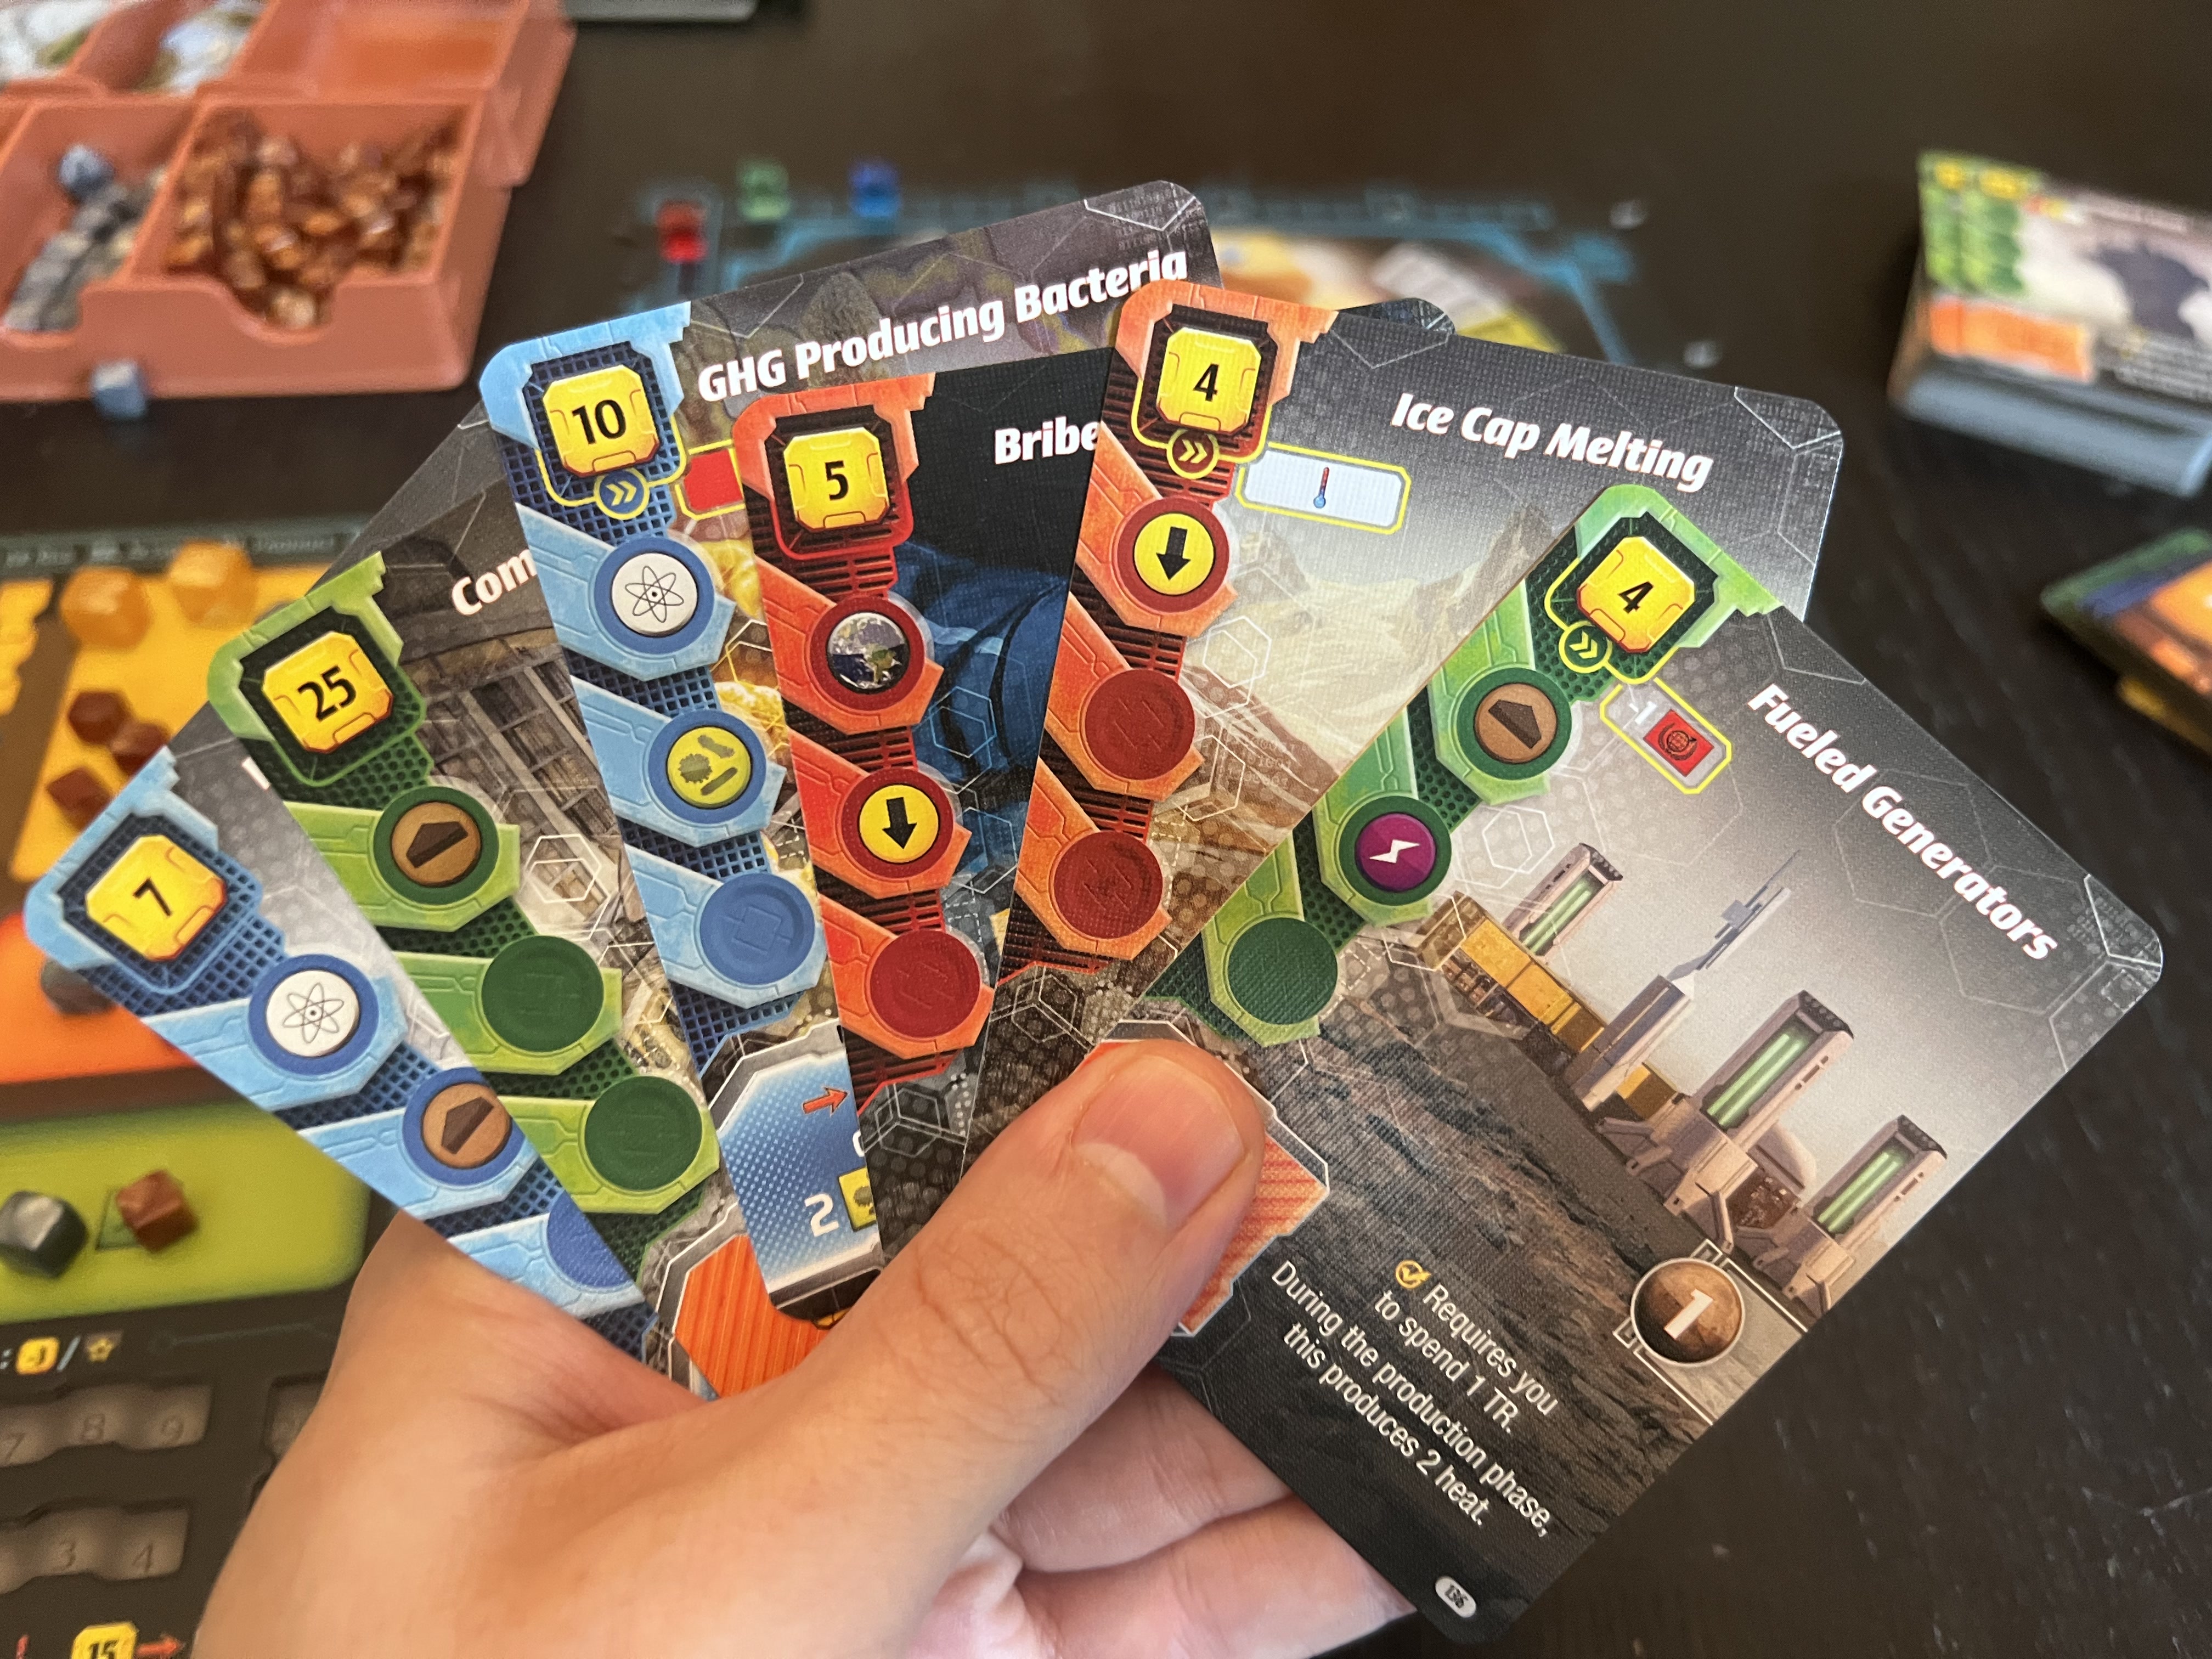 The Terraforming Mars card game is as good as we'd hoped it would be